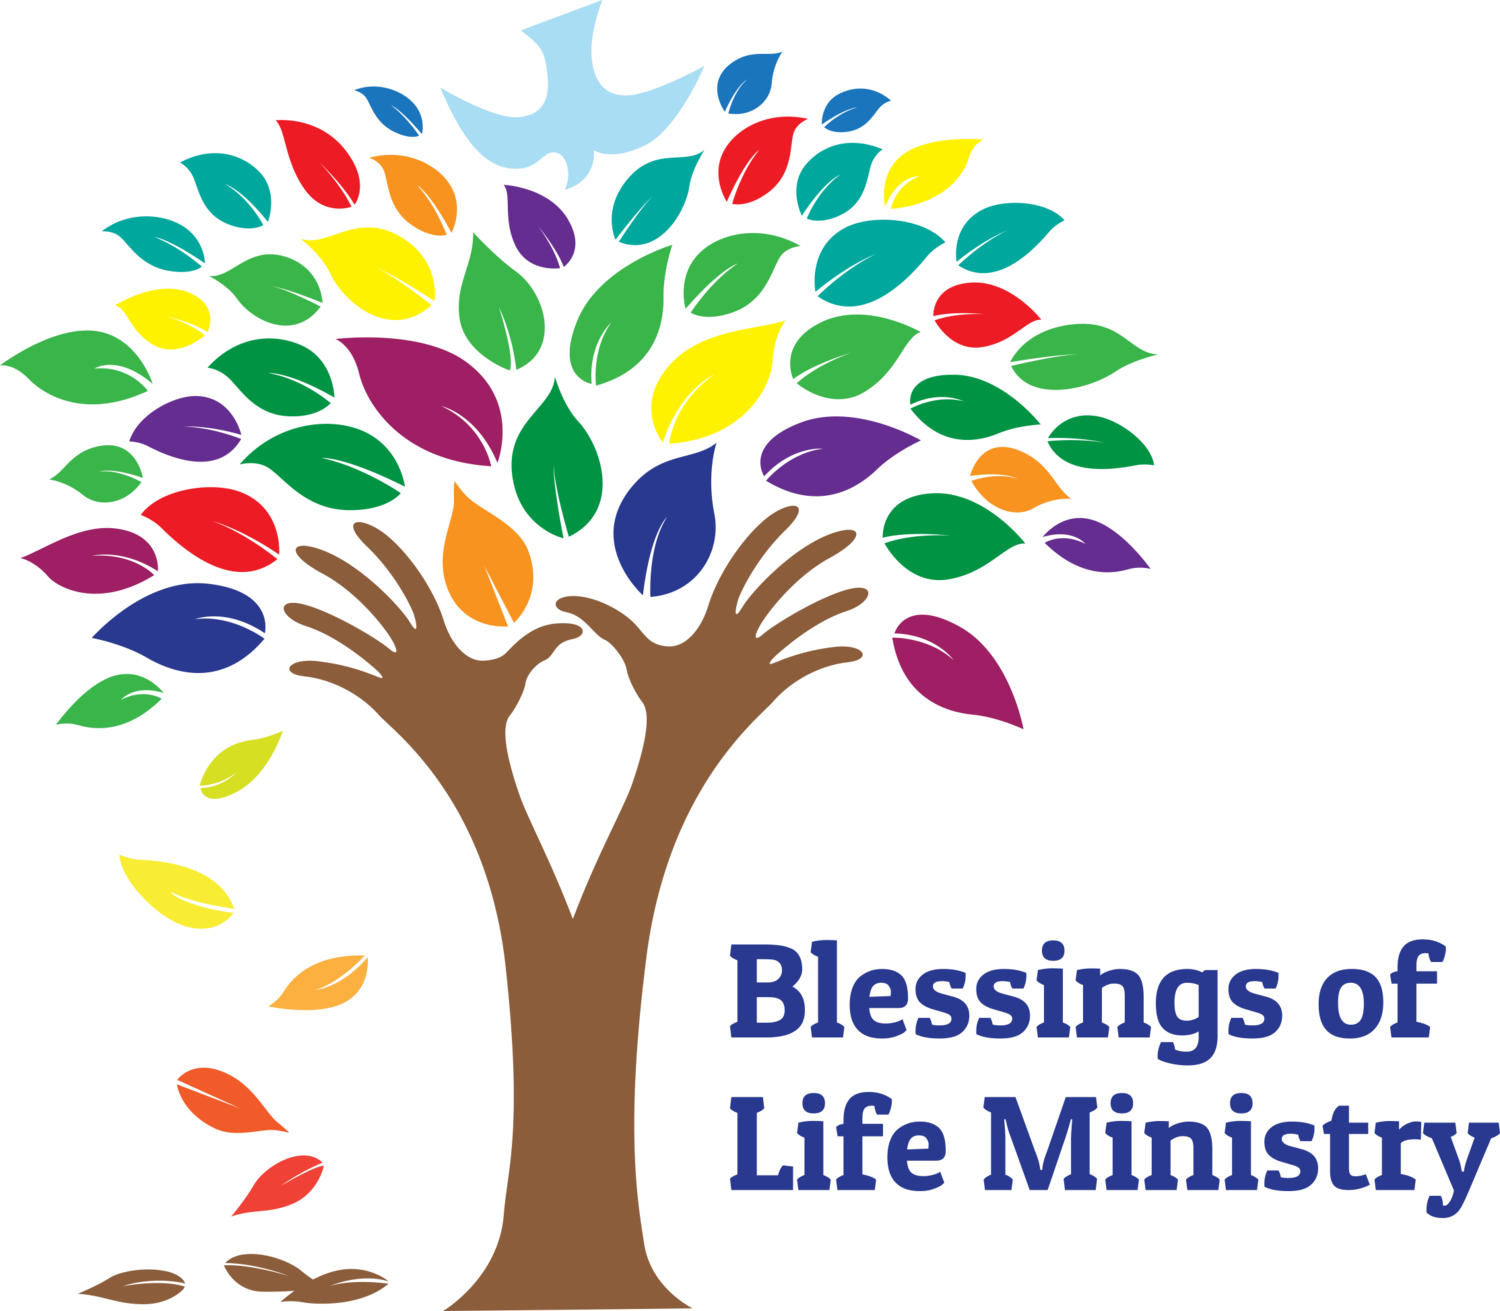 Blessings of Life Ministry